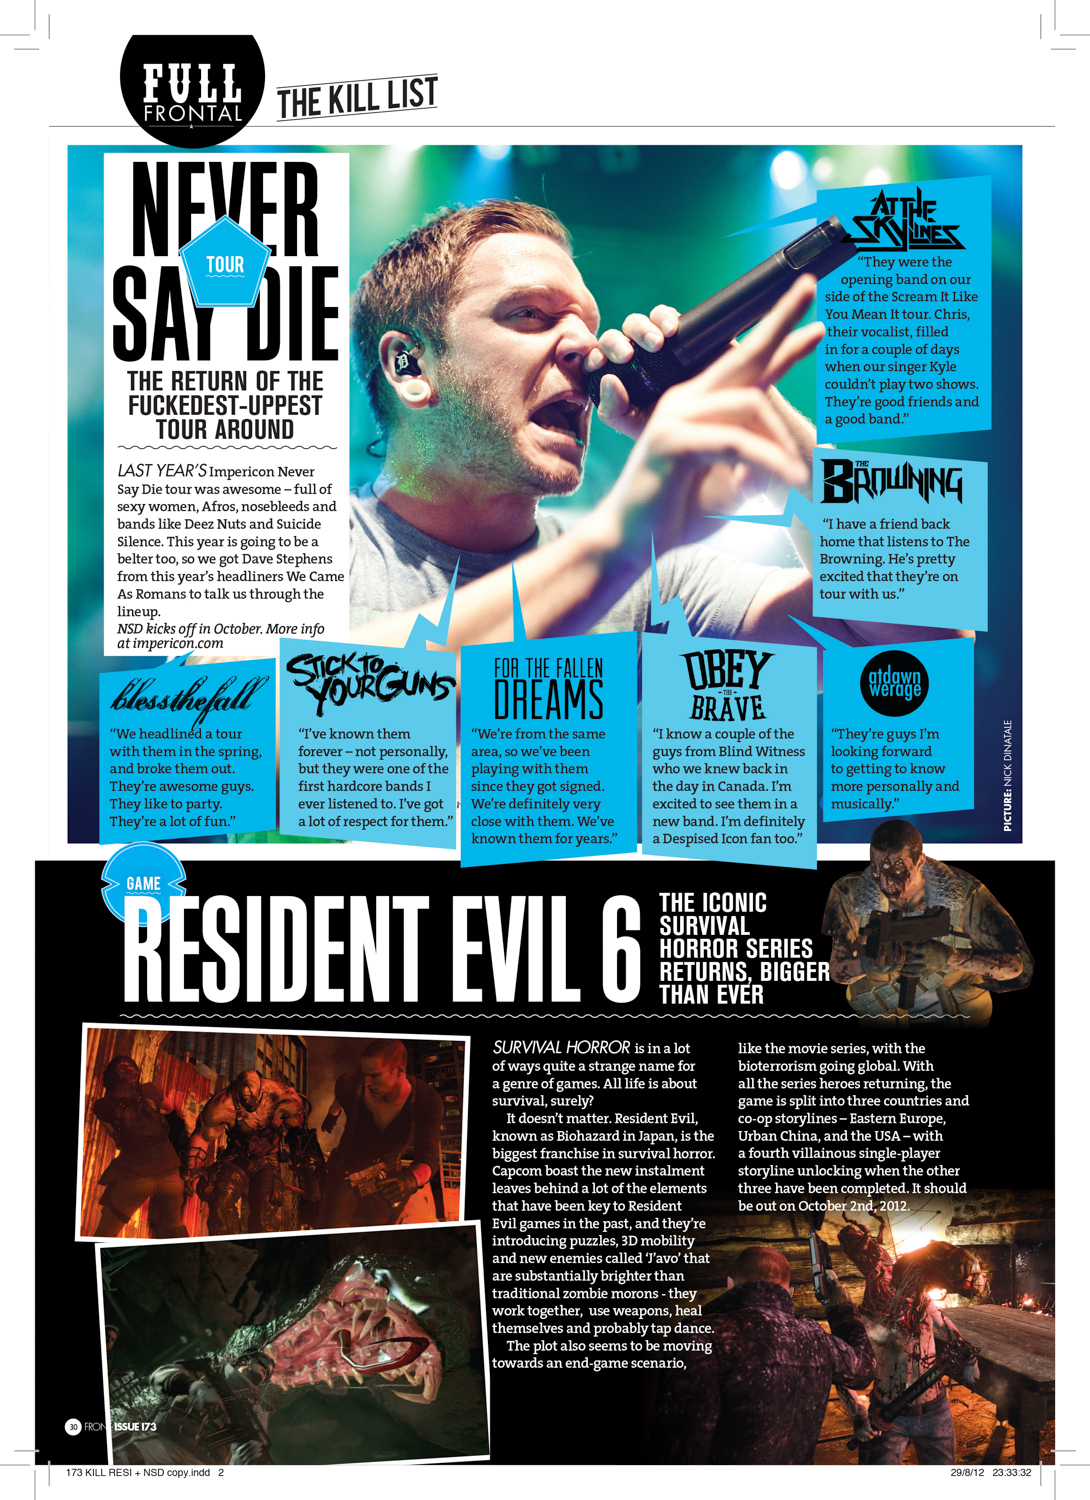  Front Magazine, Issue 173  The Kill List , pg. 30 